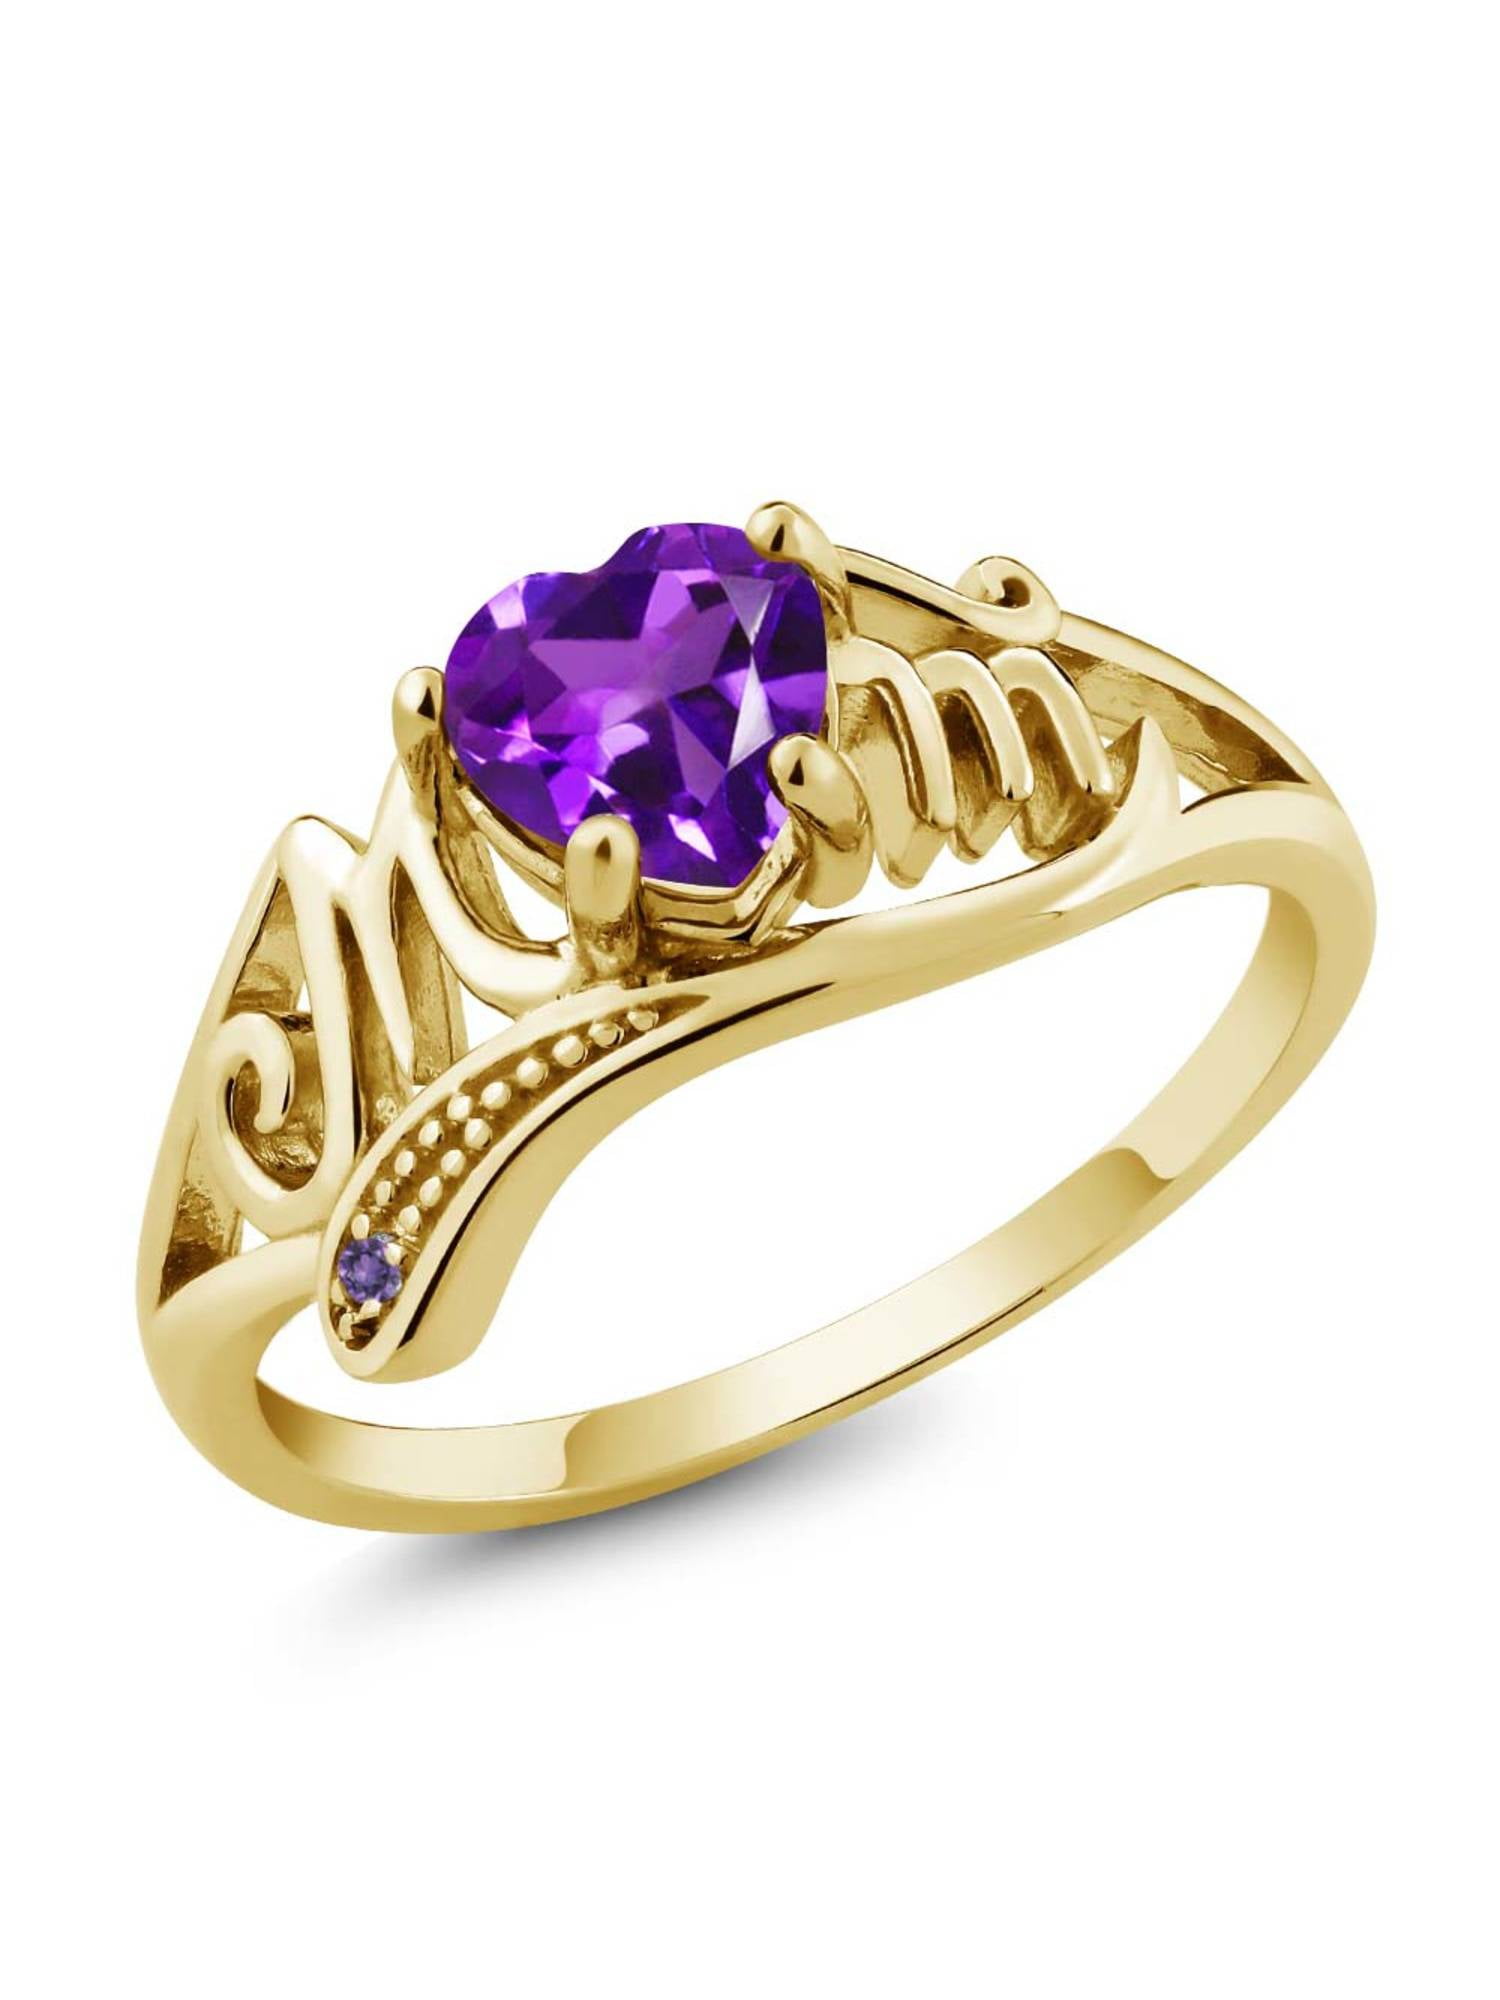 5.19 Ct Heart Shape Purple Amethyst 18K Yellow Gold Plated Silver Ring